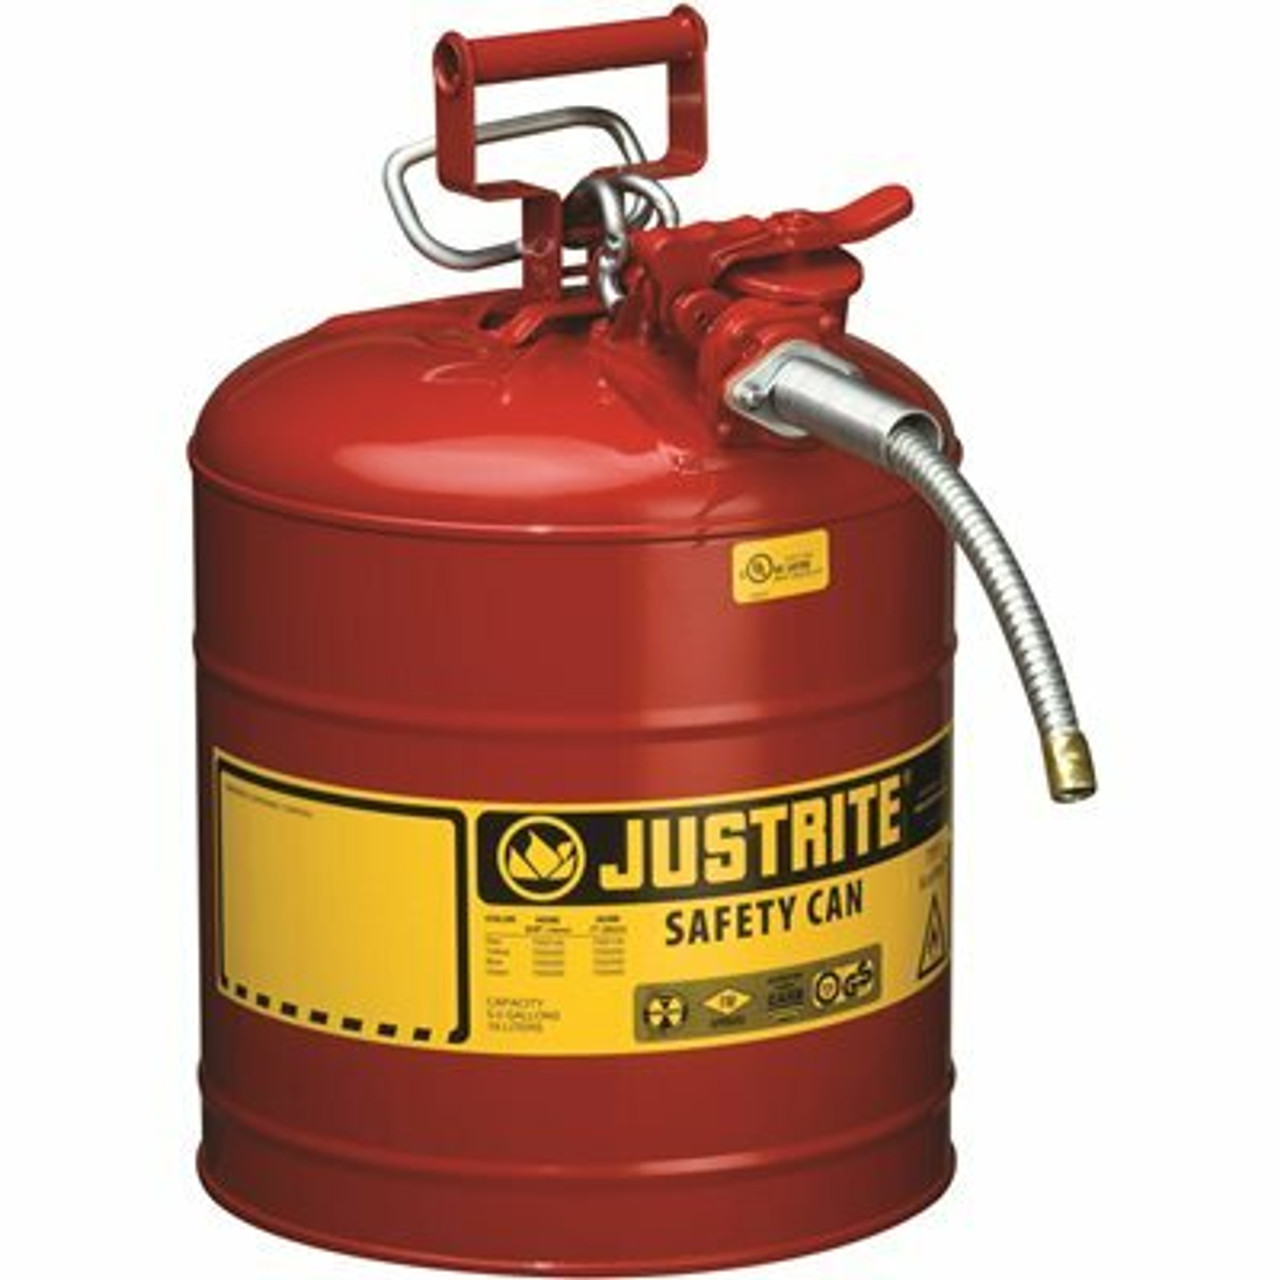 Justrite Mfg Sfty Can 5 Gl Red W/Hose - 3561285